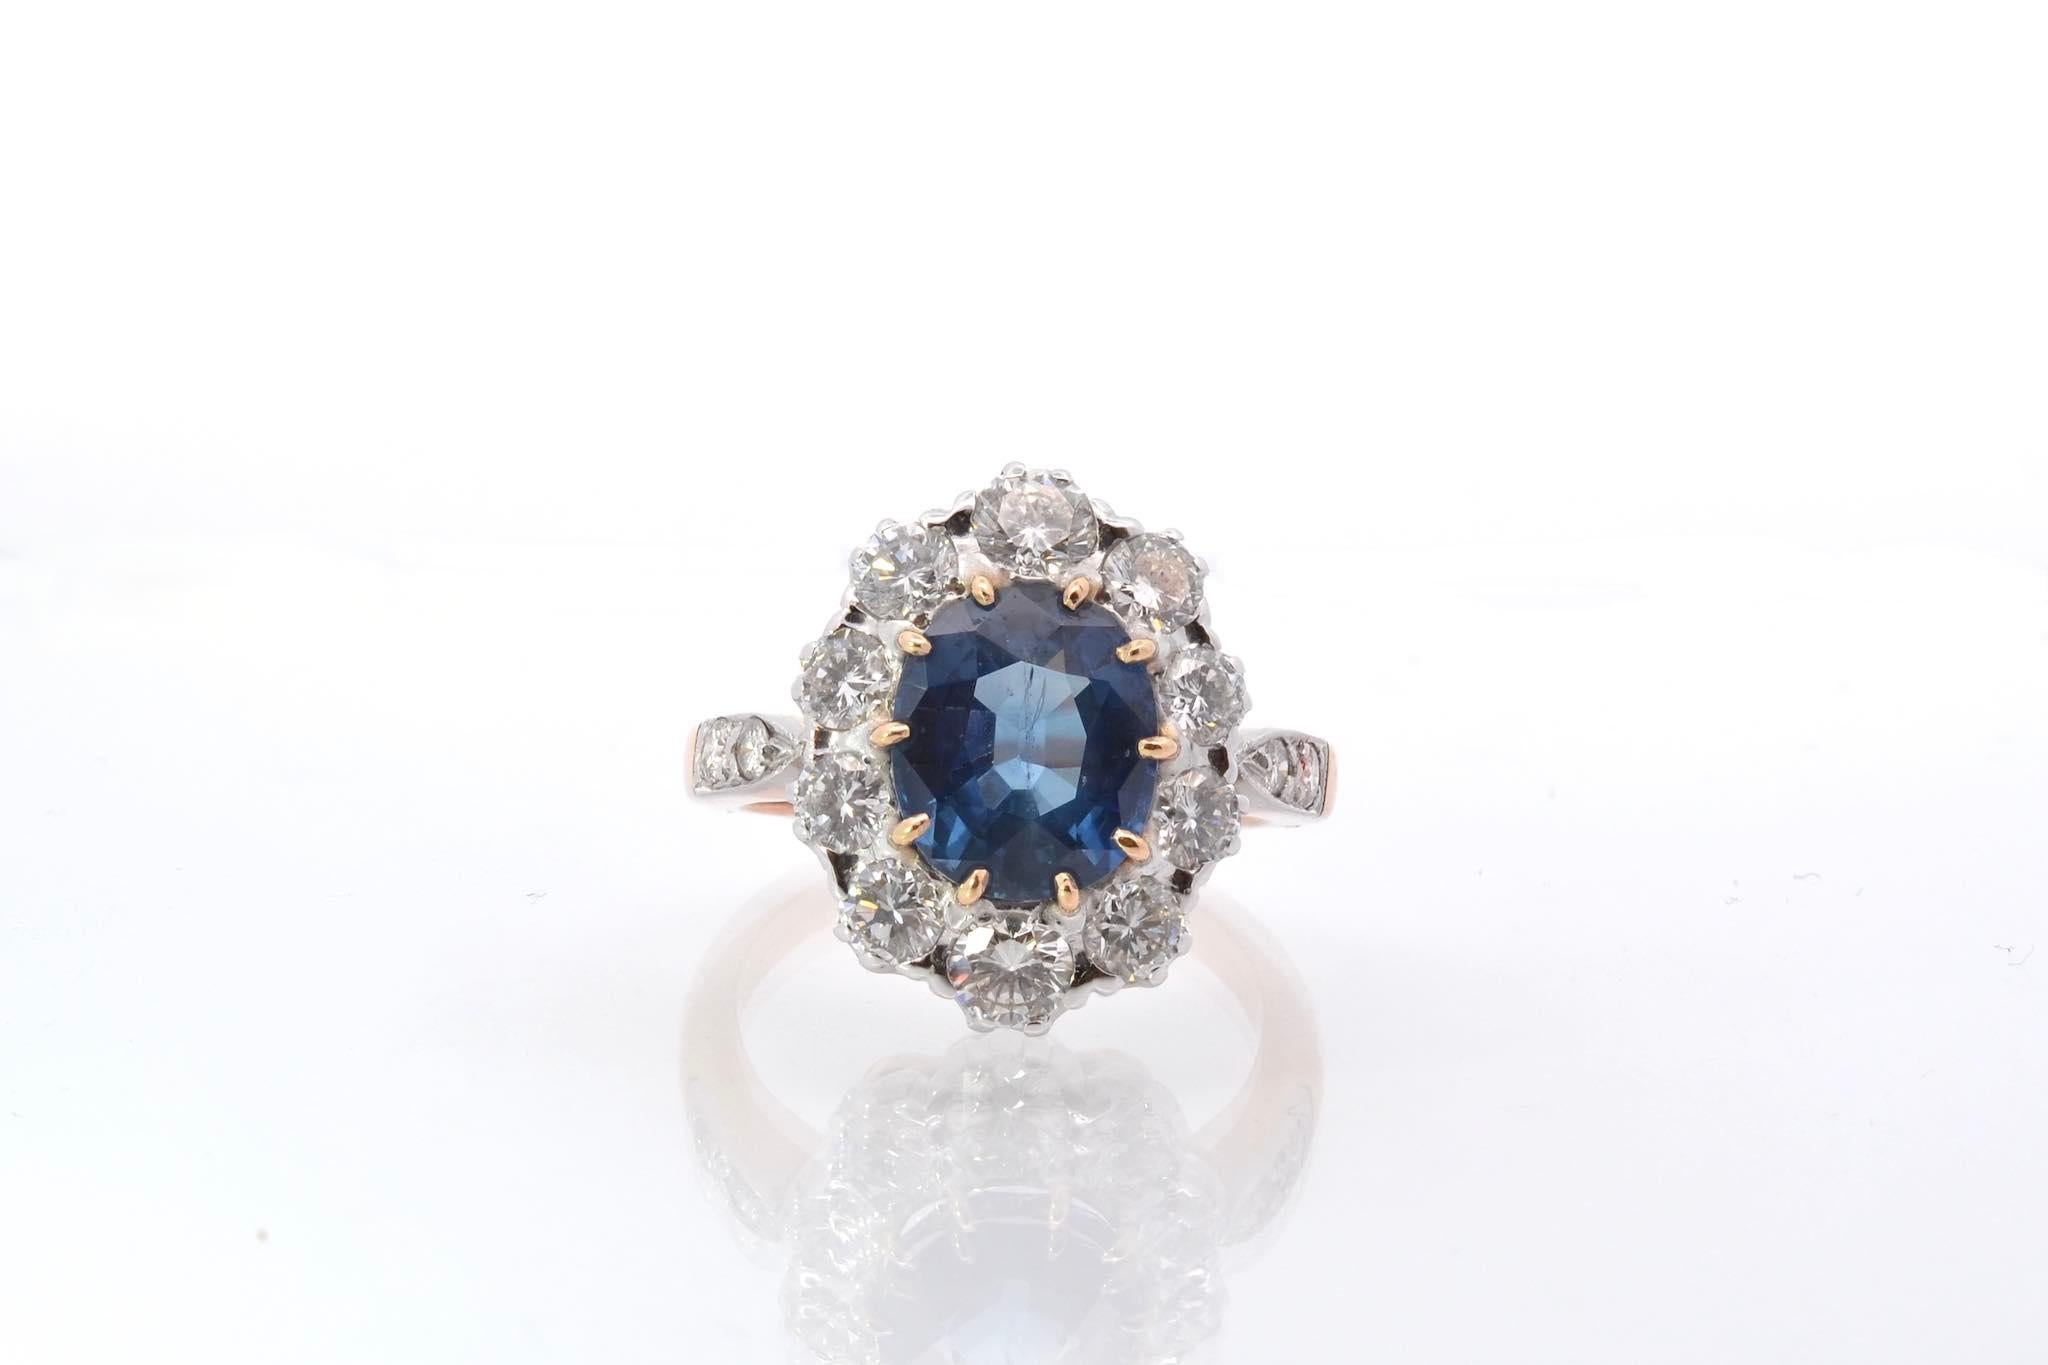 Stones: Siam sapphire of 4.32cts, 14 diamonds: 2cts
Material: 18k gold
Dimensions: 1.9cm x 1.5cm
Weight: 8g
Period: 1970
Size: 56 (free sizing)
Certificate
Ref. :25492